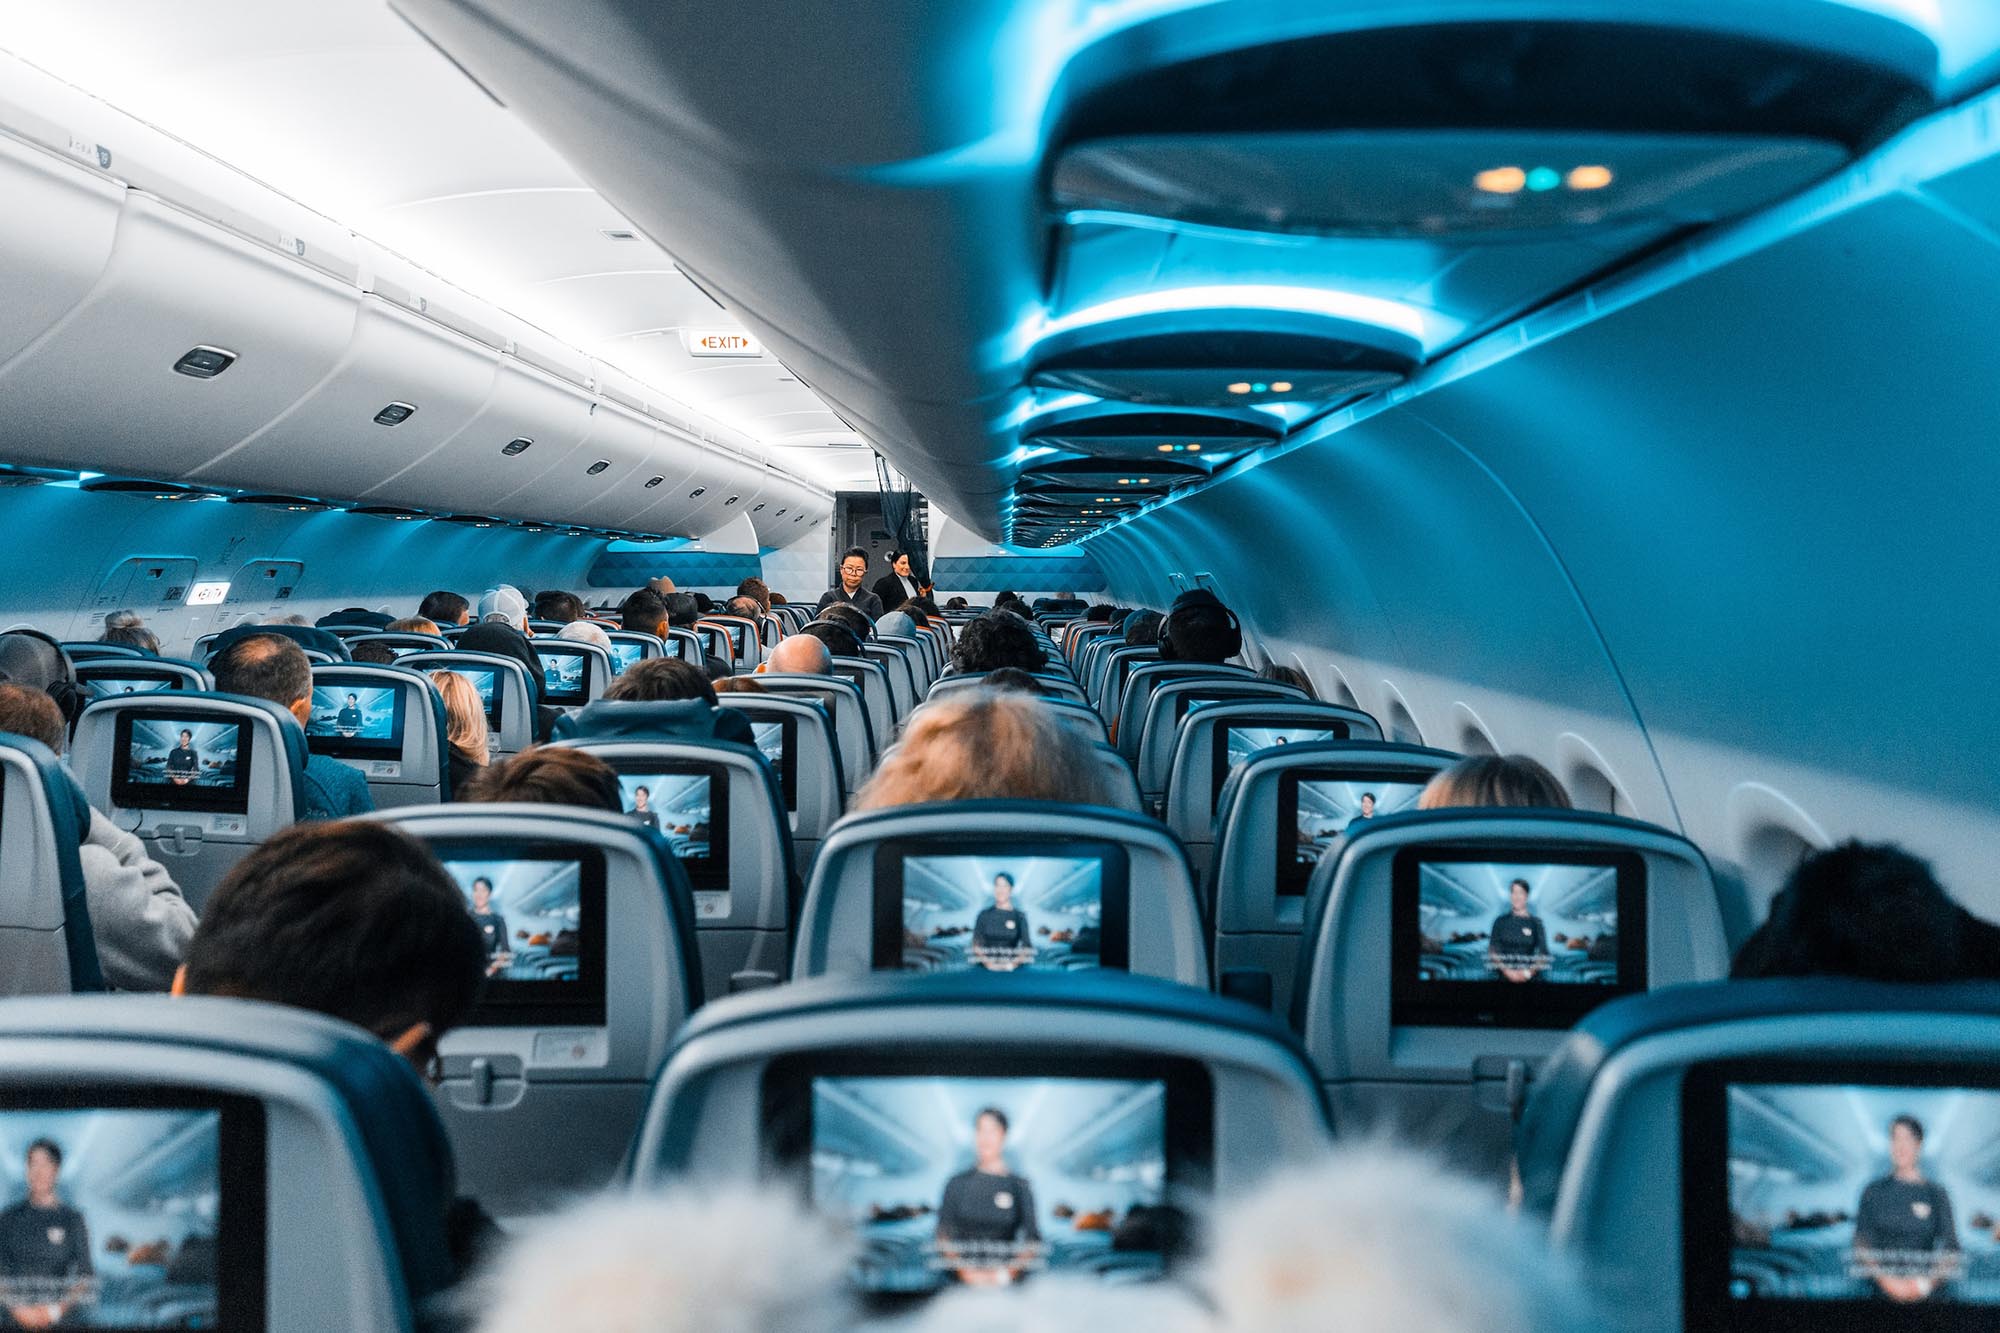 Photo: People are shown seated for an airline flight, all watching the small screens in front of them as it goes through a safety demonstration.